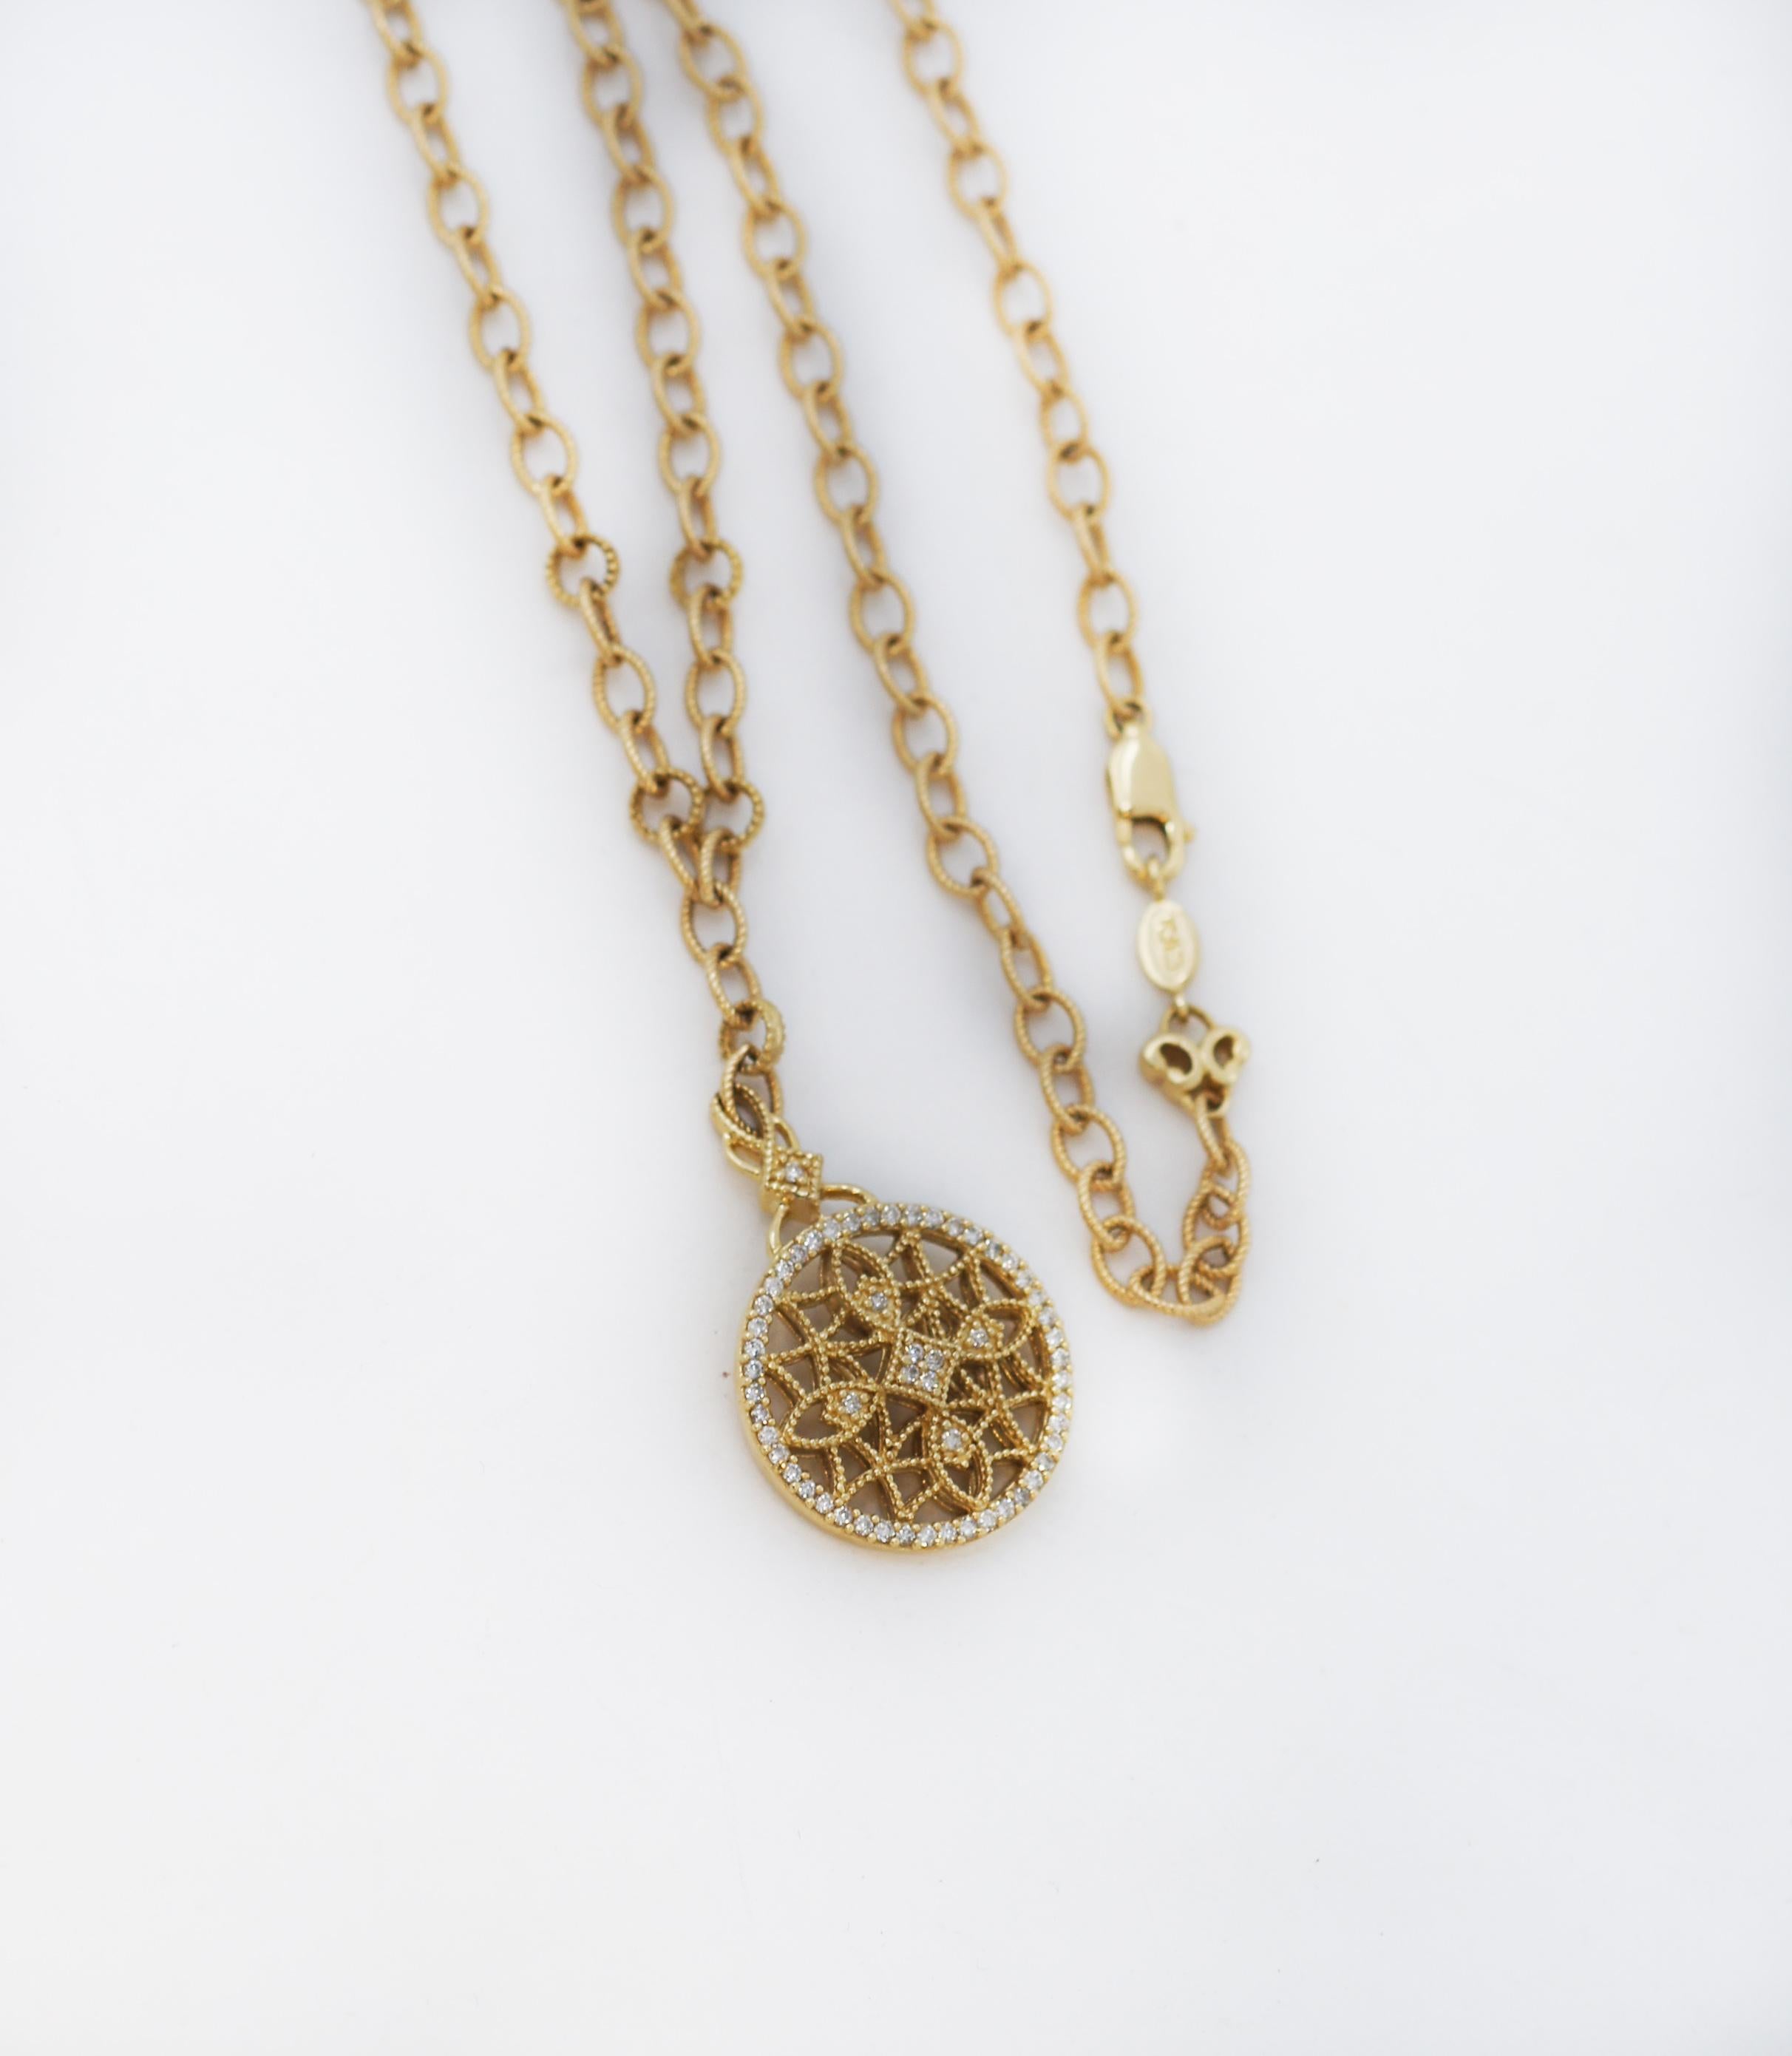 EFFY 14k gold Diamond Filigree Vintage Style Medallion Necklace
As lovely as the intricate scrollwork of antique-inspired designs, this pendant necklace from EFFY features diamonds in the Flower-shaped details.
Style: Diamond Pendant